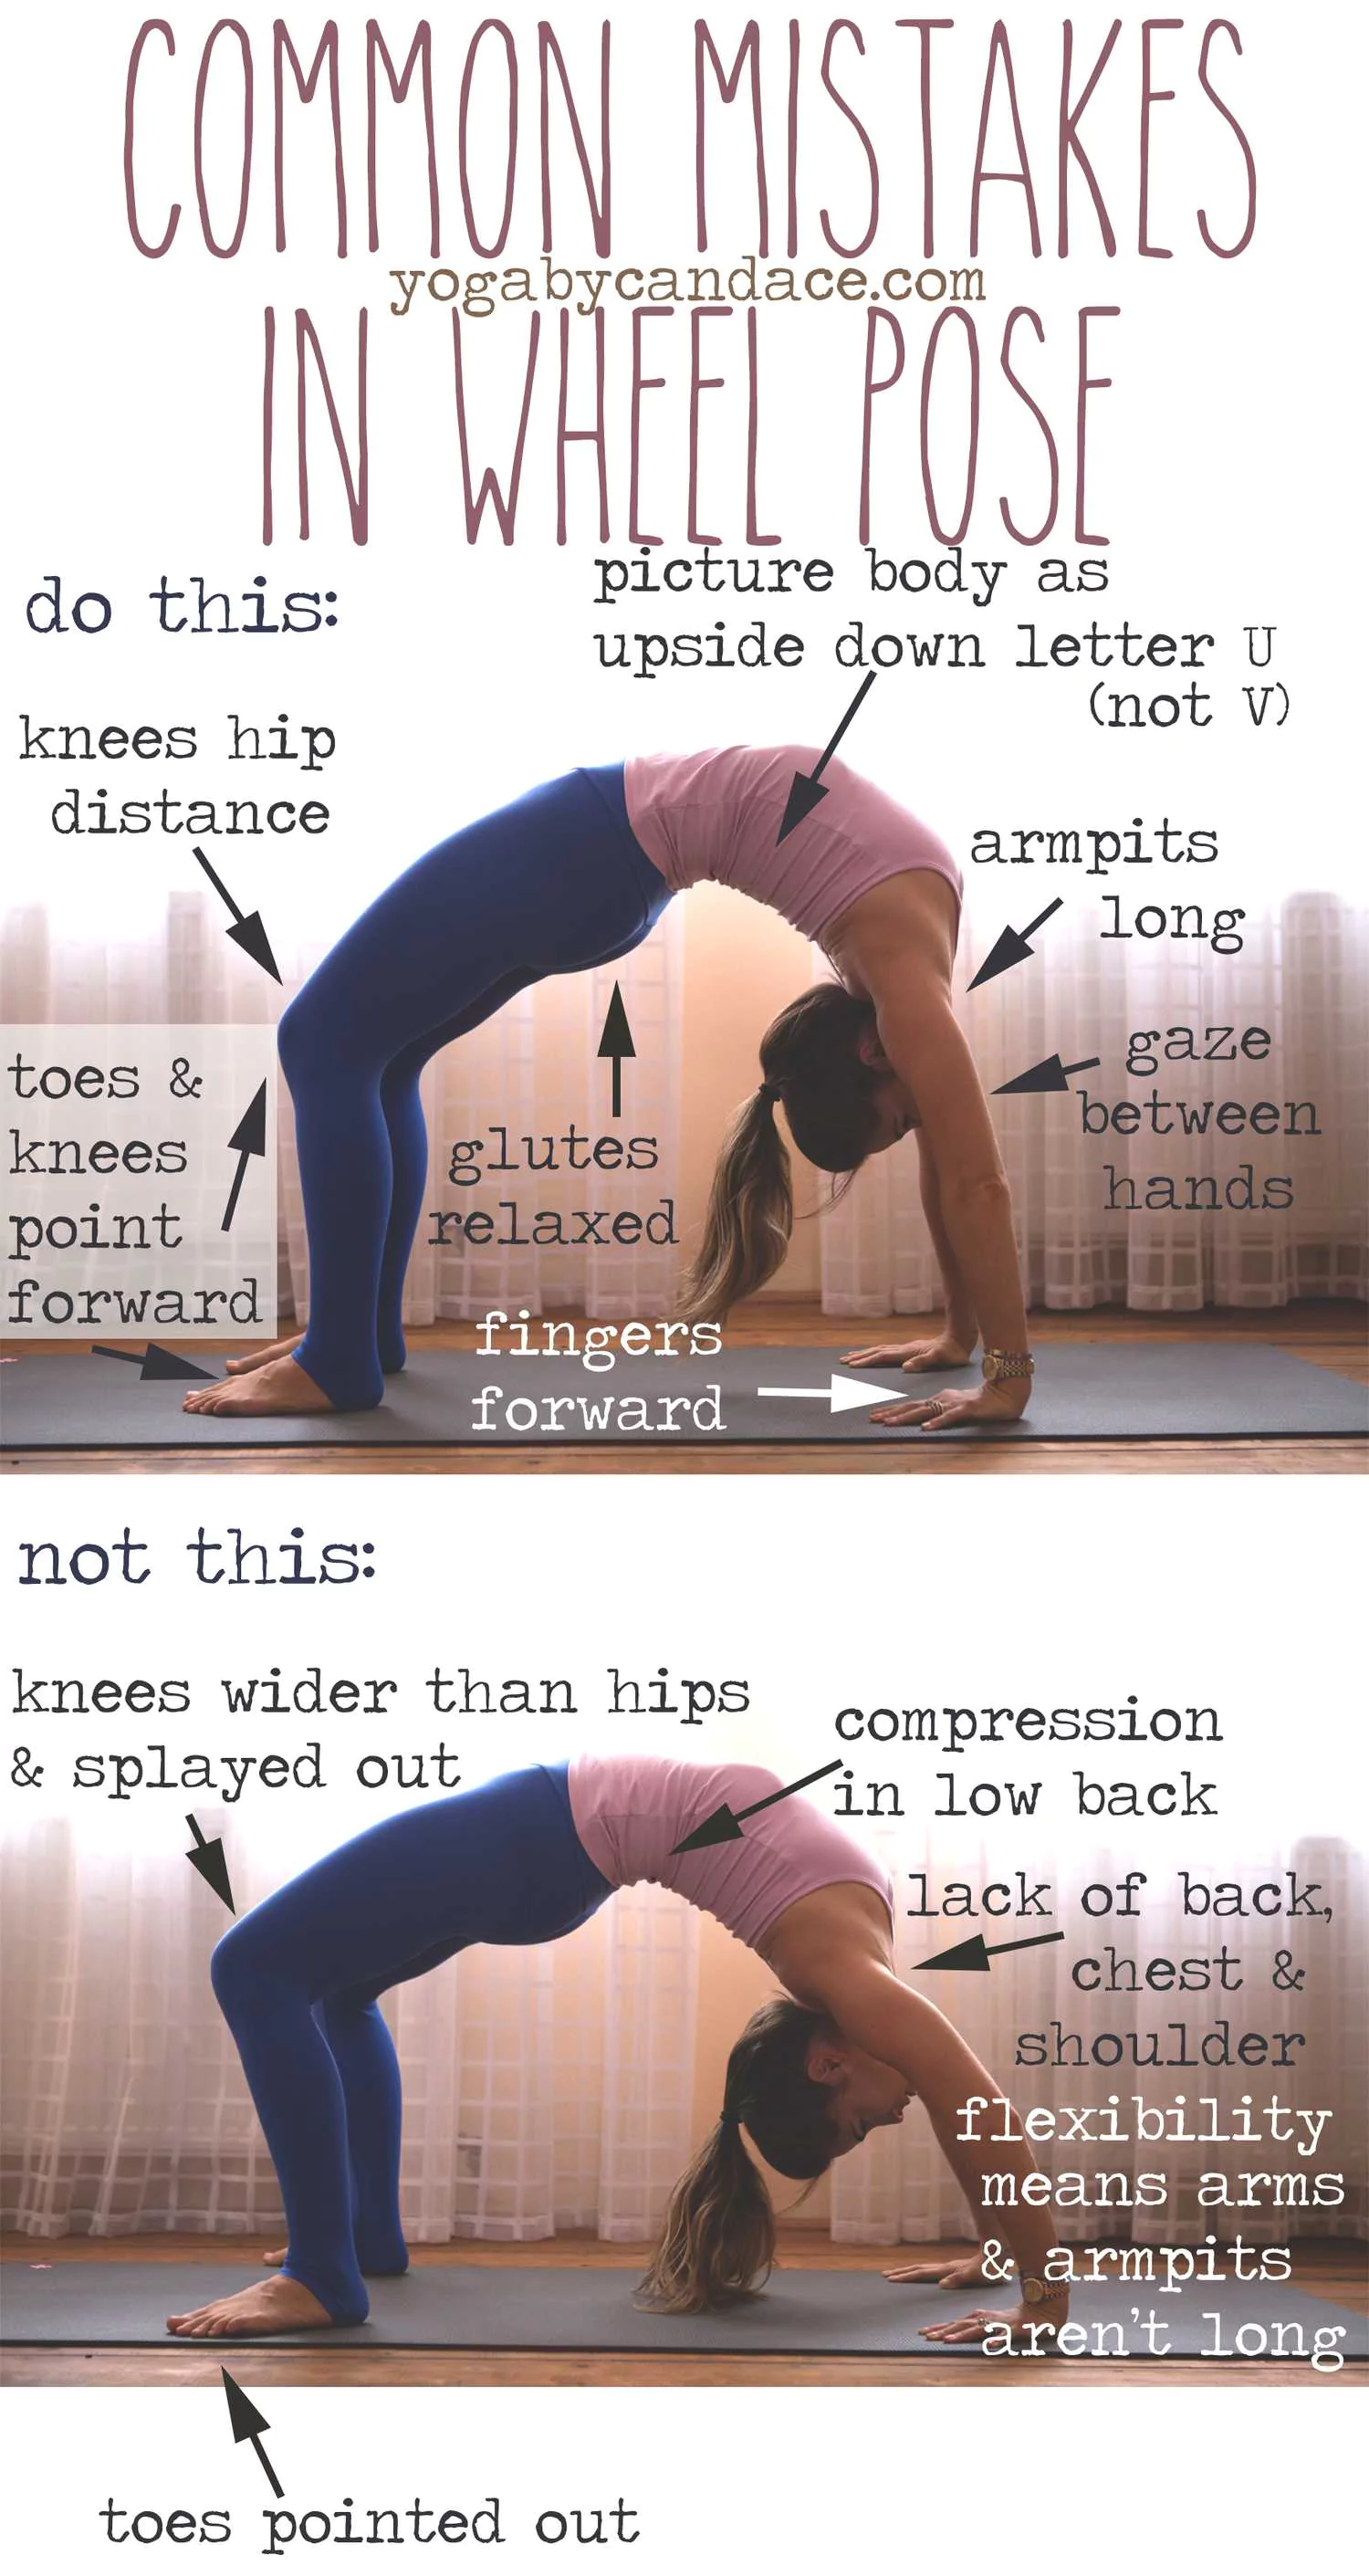 Common Mistakes In Wheel Pose